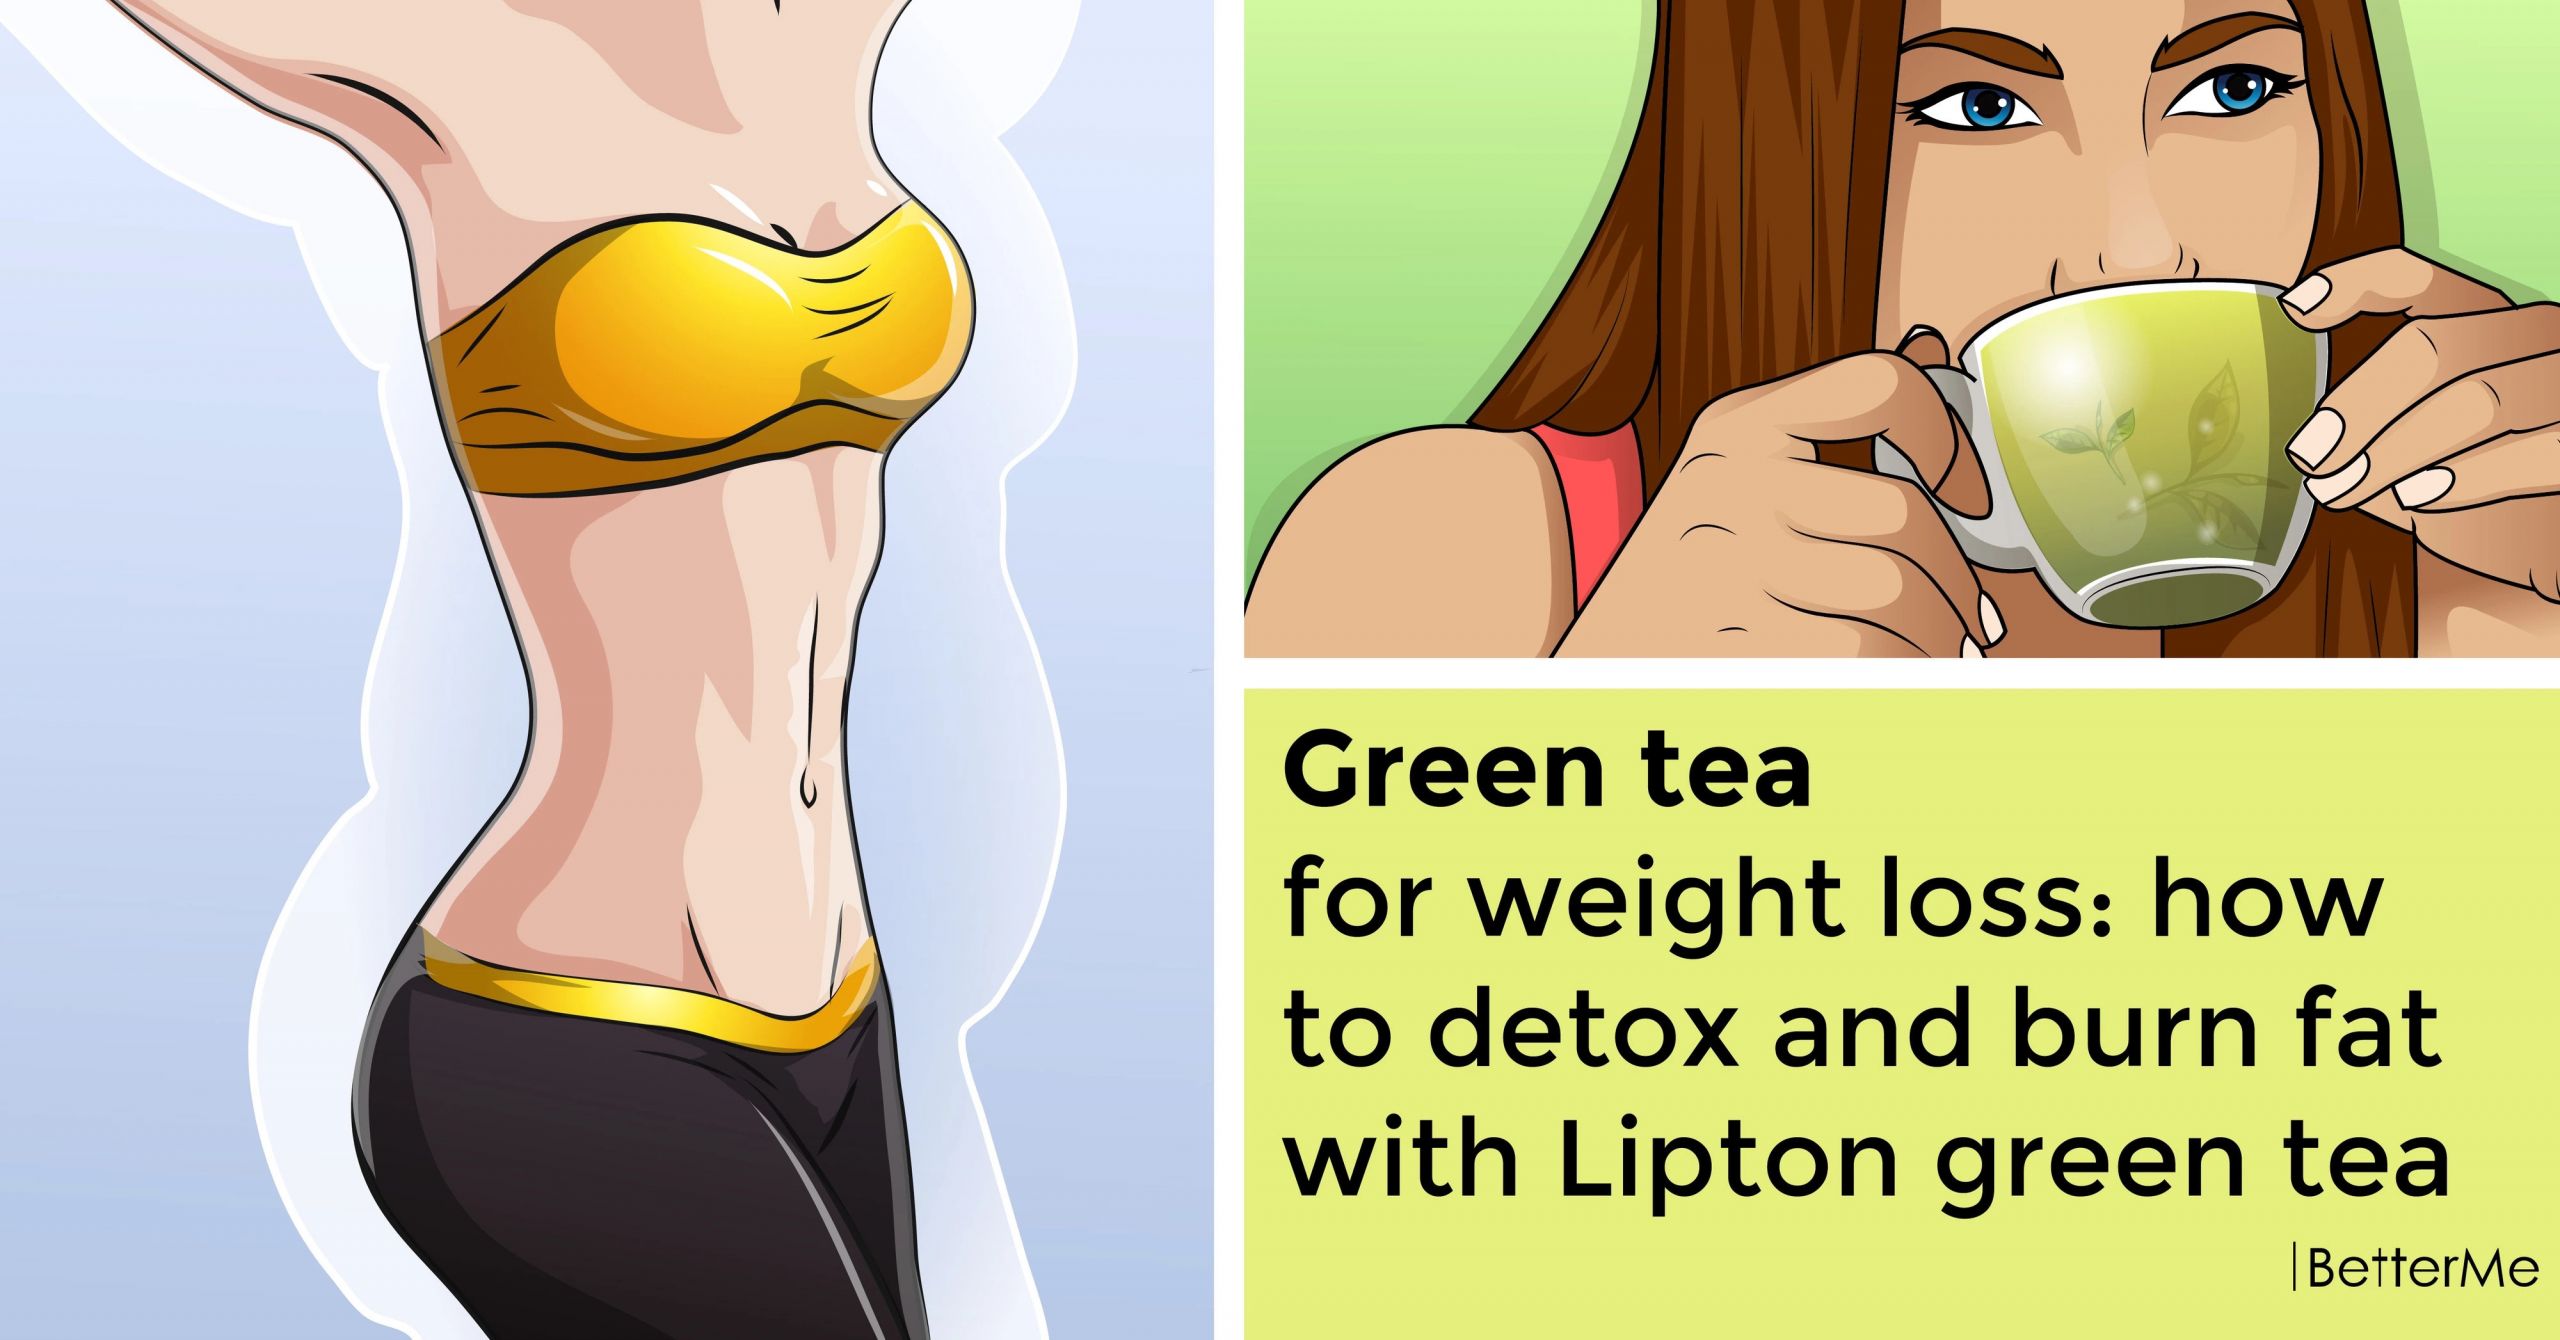 Lipton Green Tea Weight Loss
 Green tea to lose weight how to detox and burn fat with